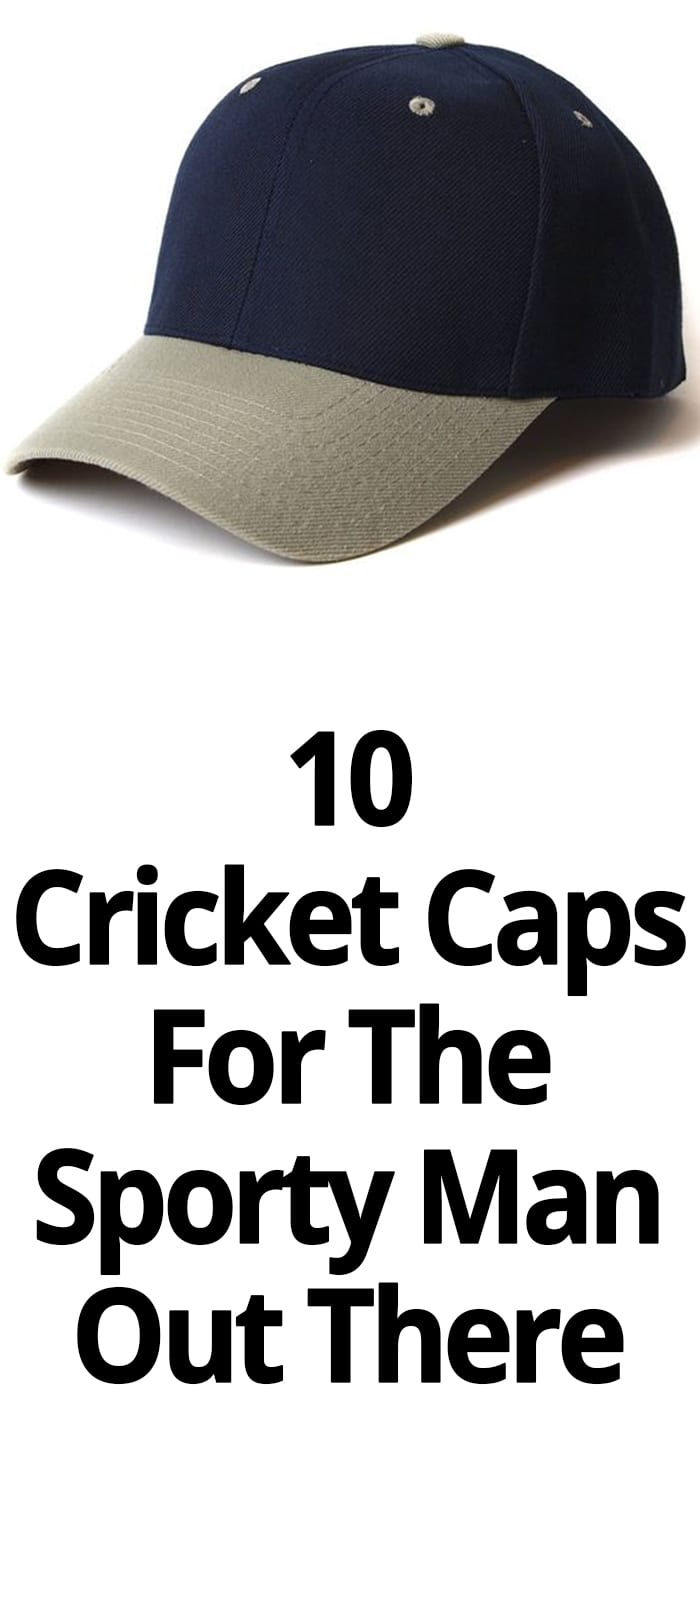 CRICKET CAPS FOR THE SPORTY MAN OUT THERE